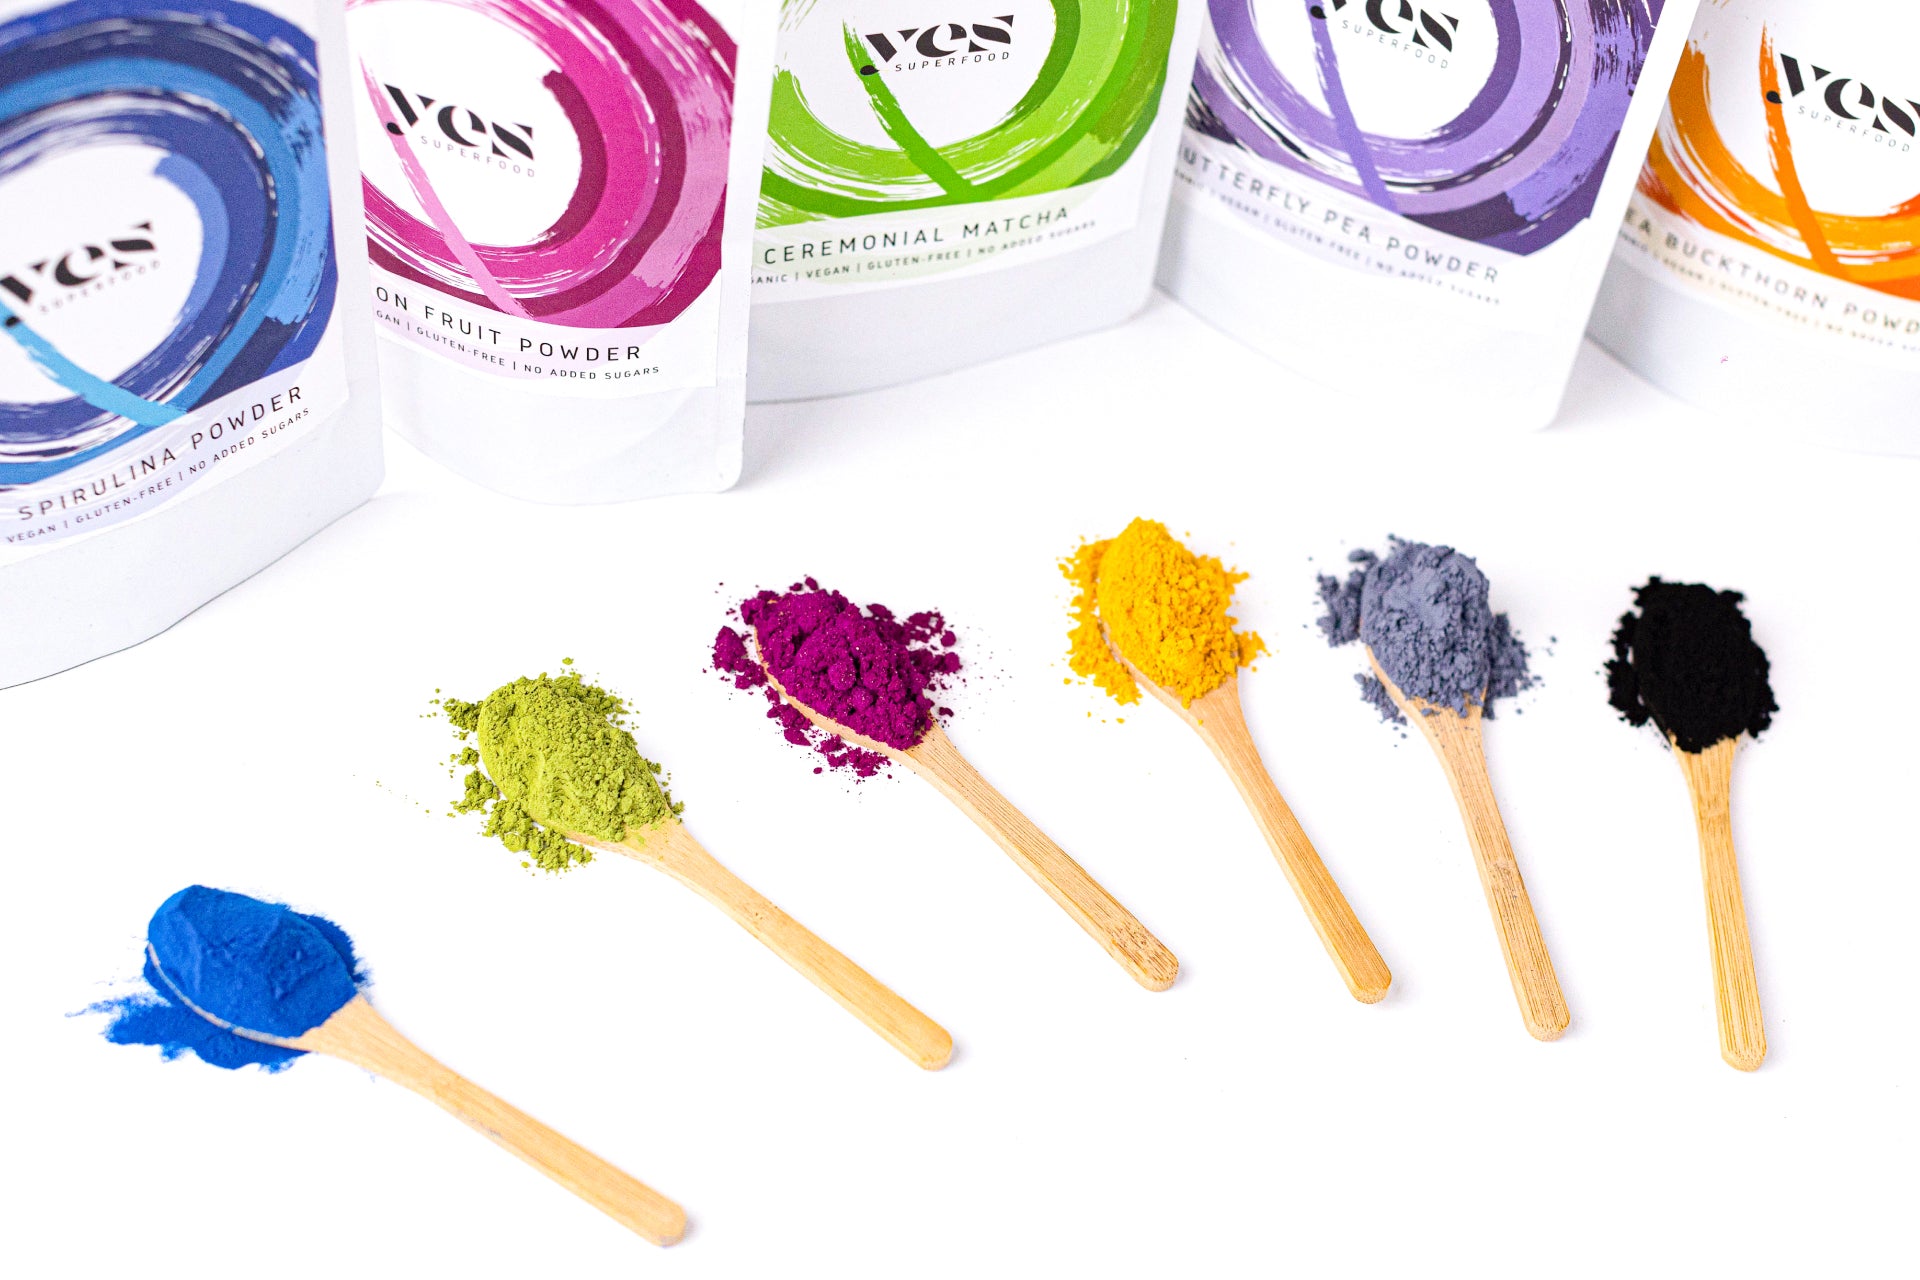 THE MOST EFFICIENT WAYS TO USE THE YES SUPERFOOD POWDERS